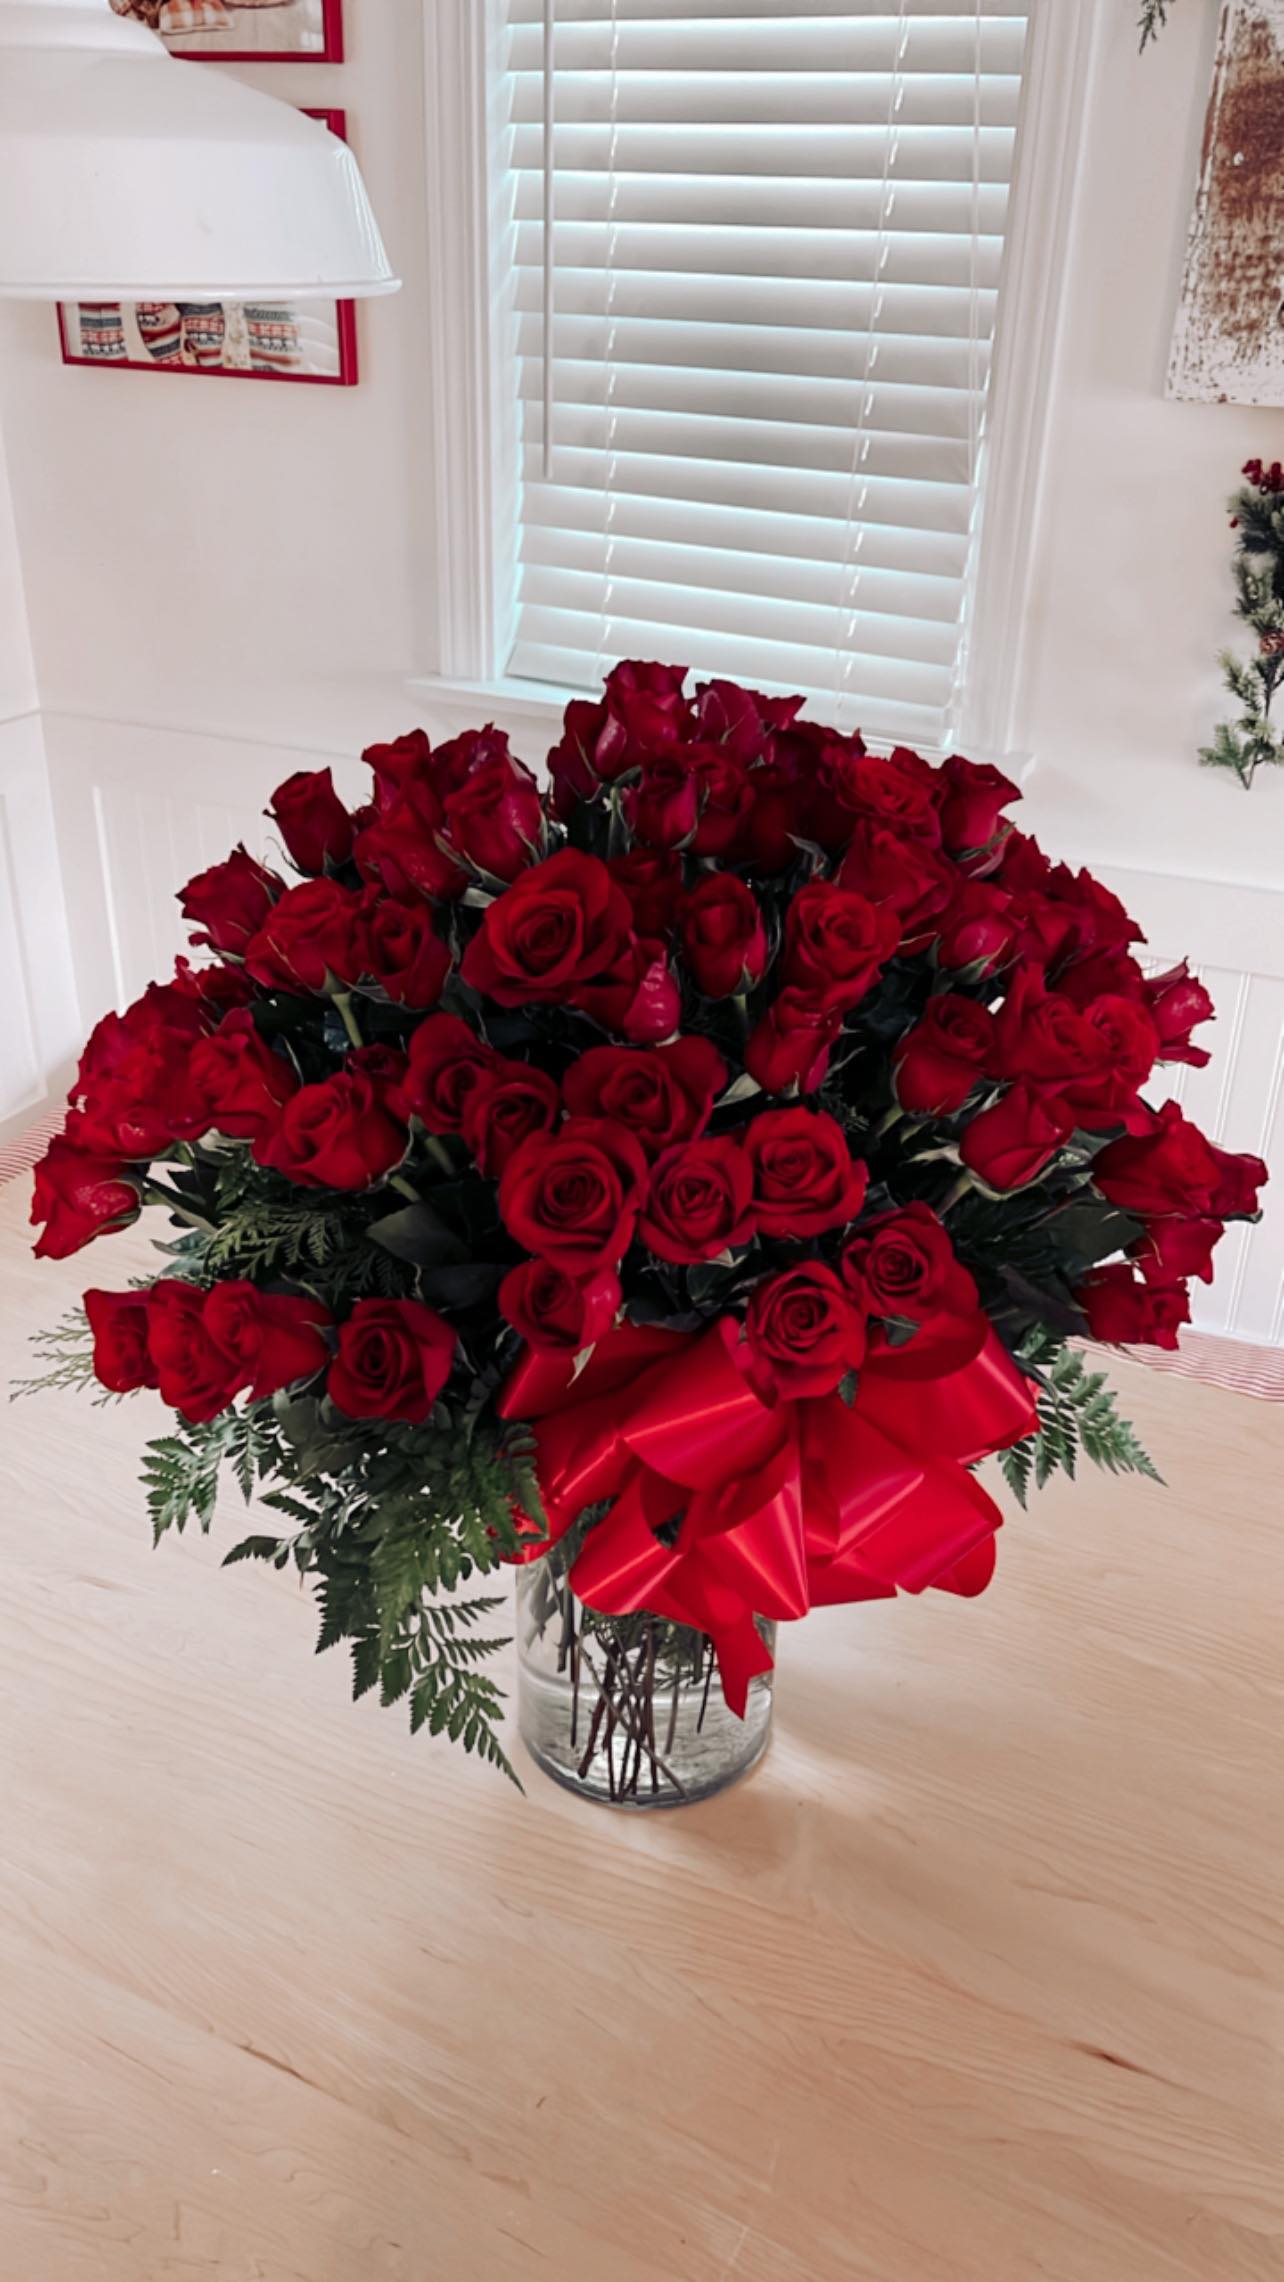 100 red stem long roses in clear vase on a table